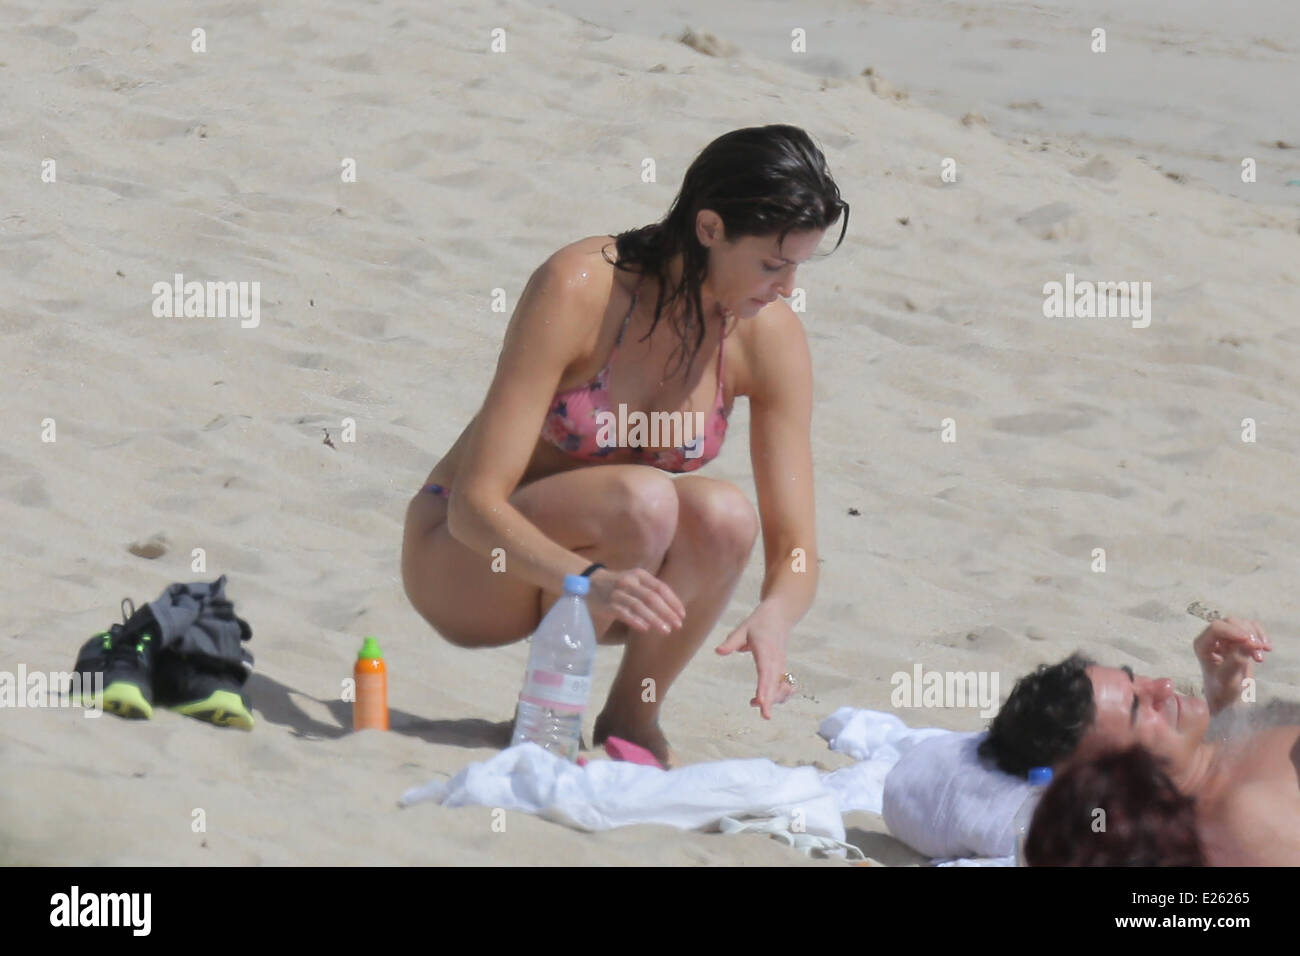 Model and actress Stephanie Seymour enjoys a family holiday with Peter Brant in Saint Barthelemy. Seymour still has a stunning bikini body at 45 years of age.  Featuring: Stephanie Seymour Where: Saint Barthelemy When: 28 Dec 2013 Stock Photo